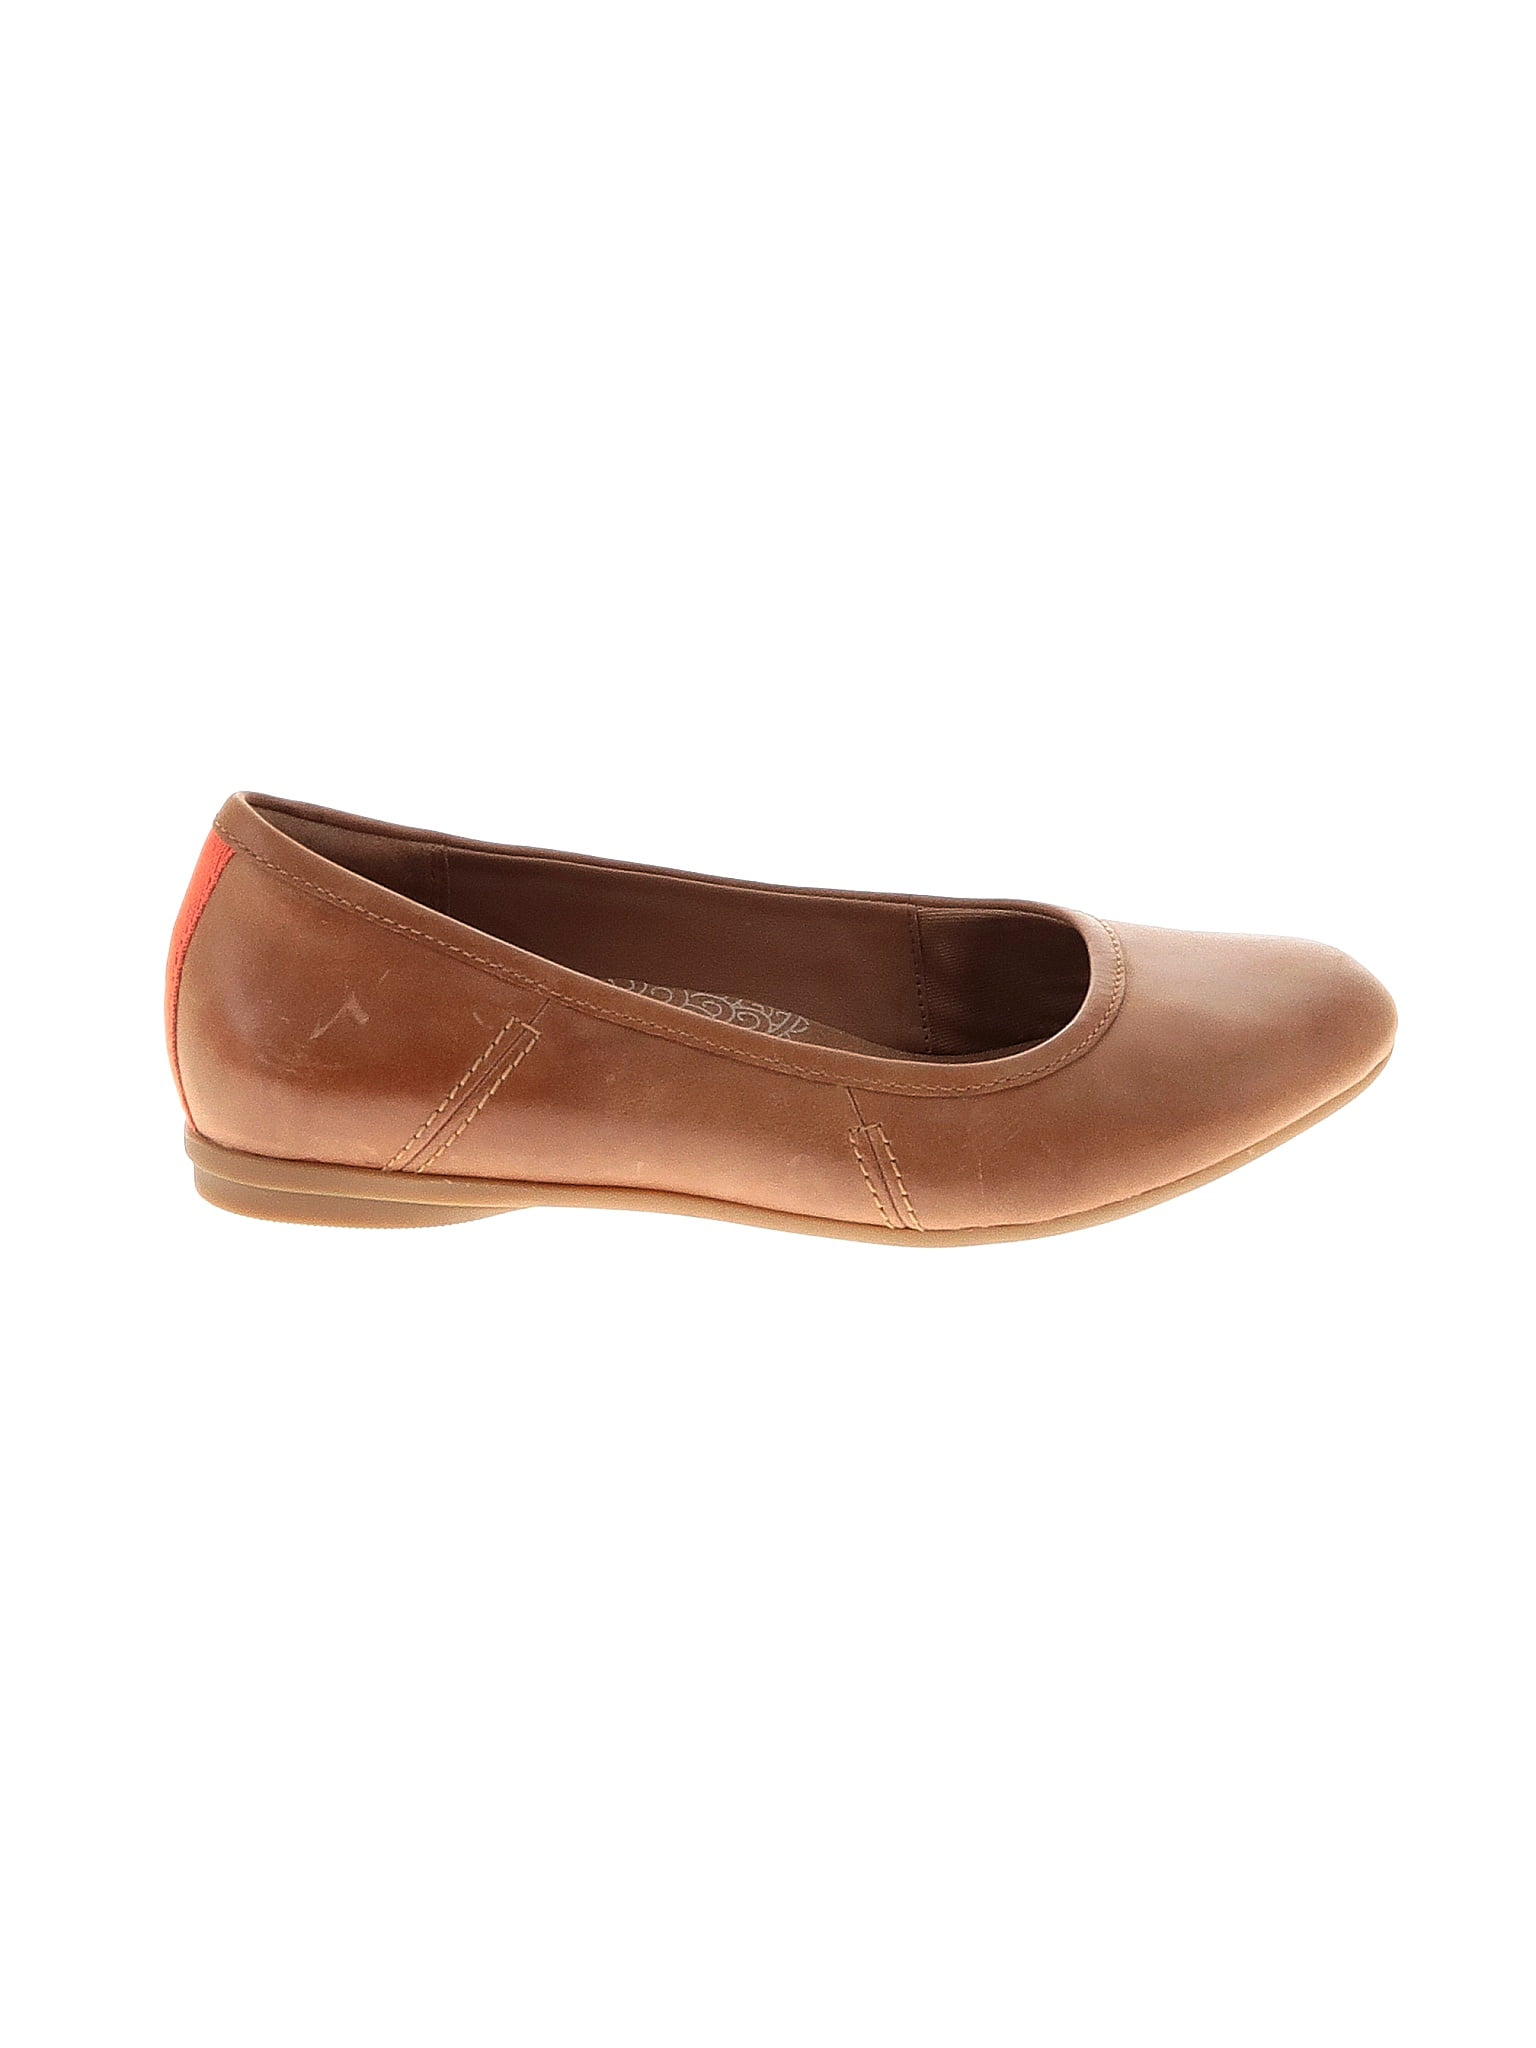 Clarks Solid Brown Tan Flats Size 6 1/2 - 66% off | thredUP